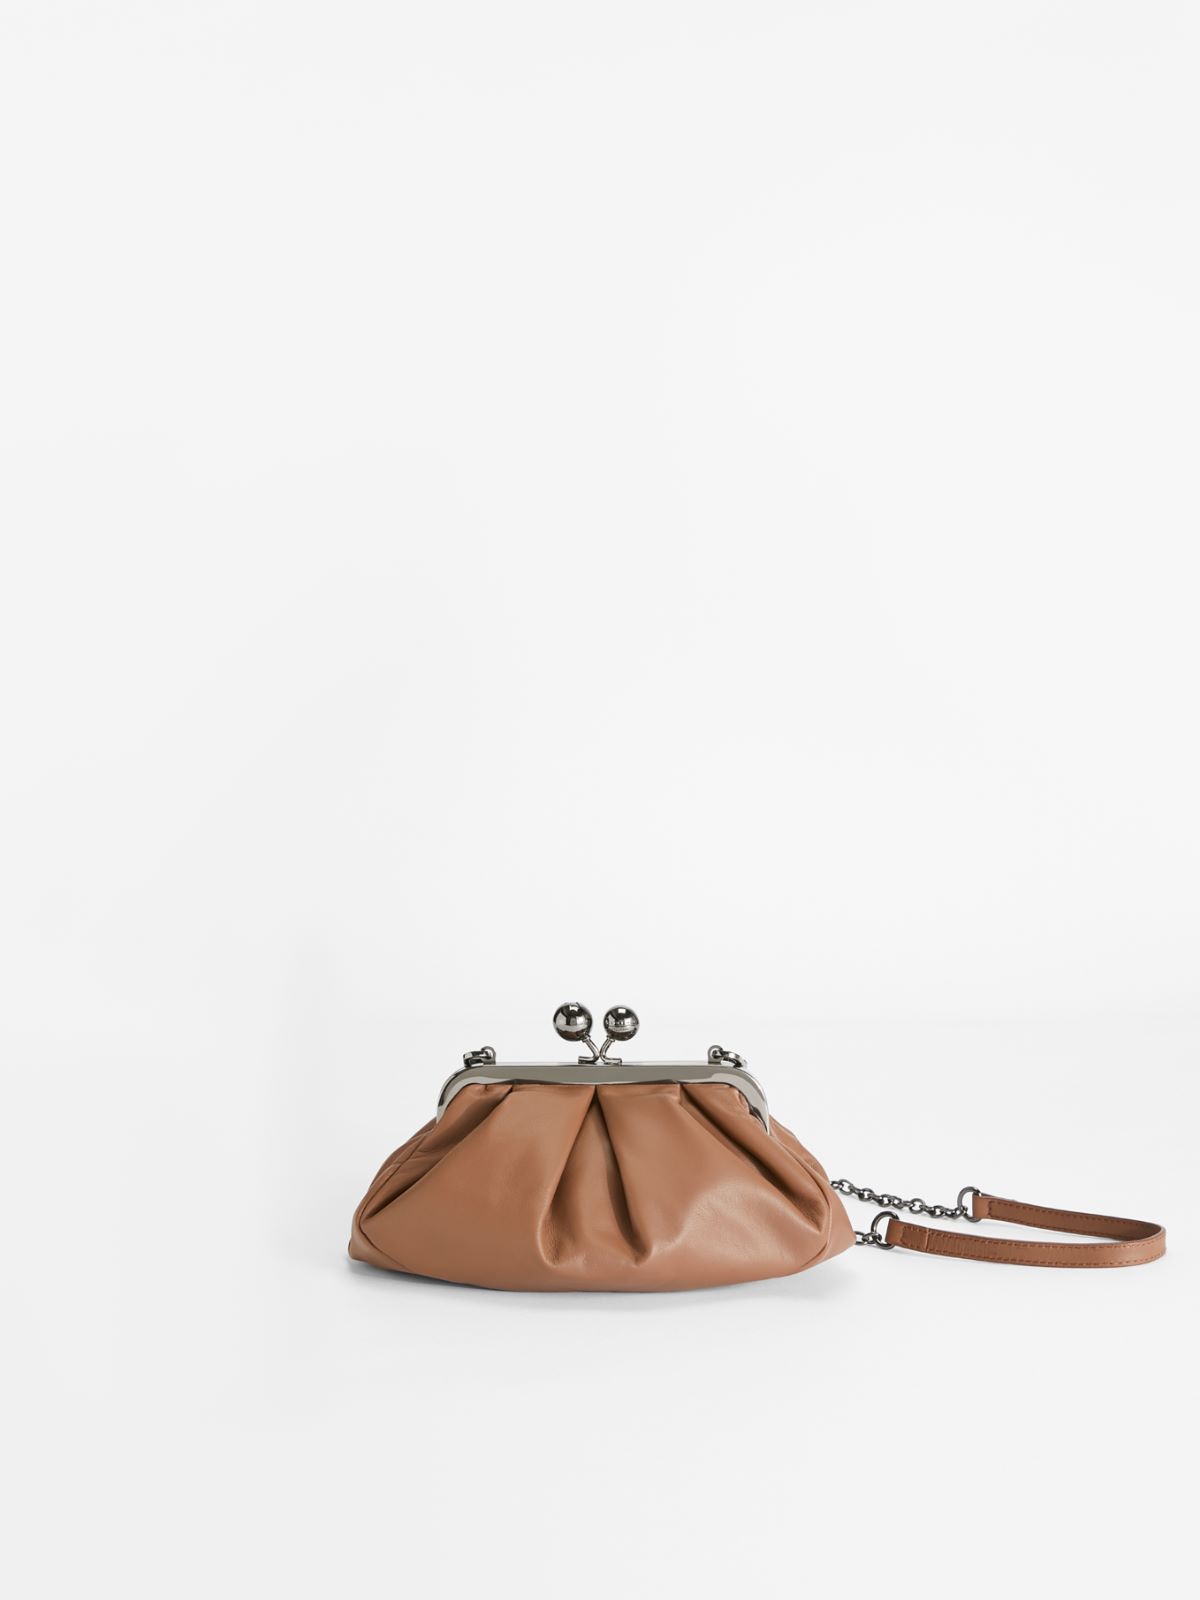 Small leather Pasticcino Bag - TOBACCO - Weekend Max Mara - 3